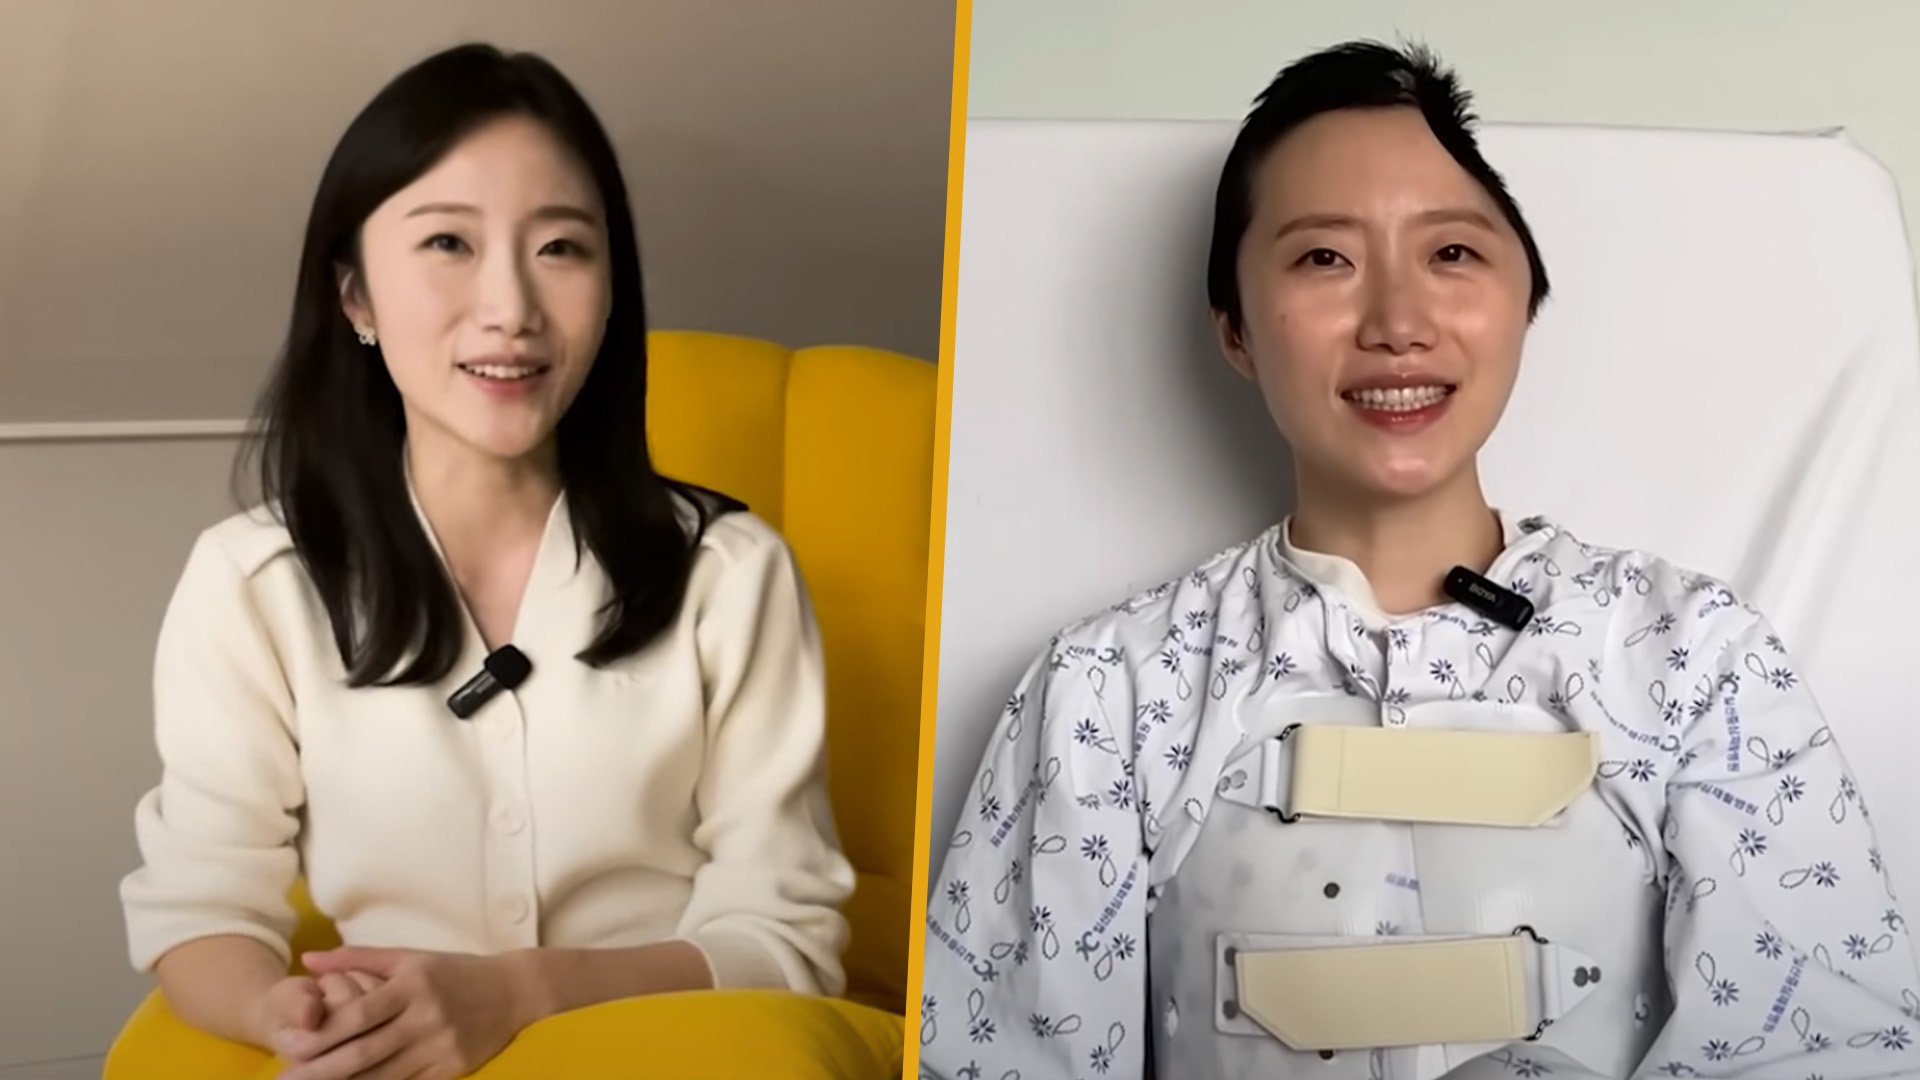 A former South Korean flight attendant who lost part of her skull as the result of a fall in the street has impressed people on social media with her battle to cope with the consequences. Photo: SCMP composite/YouTube